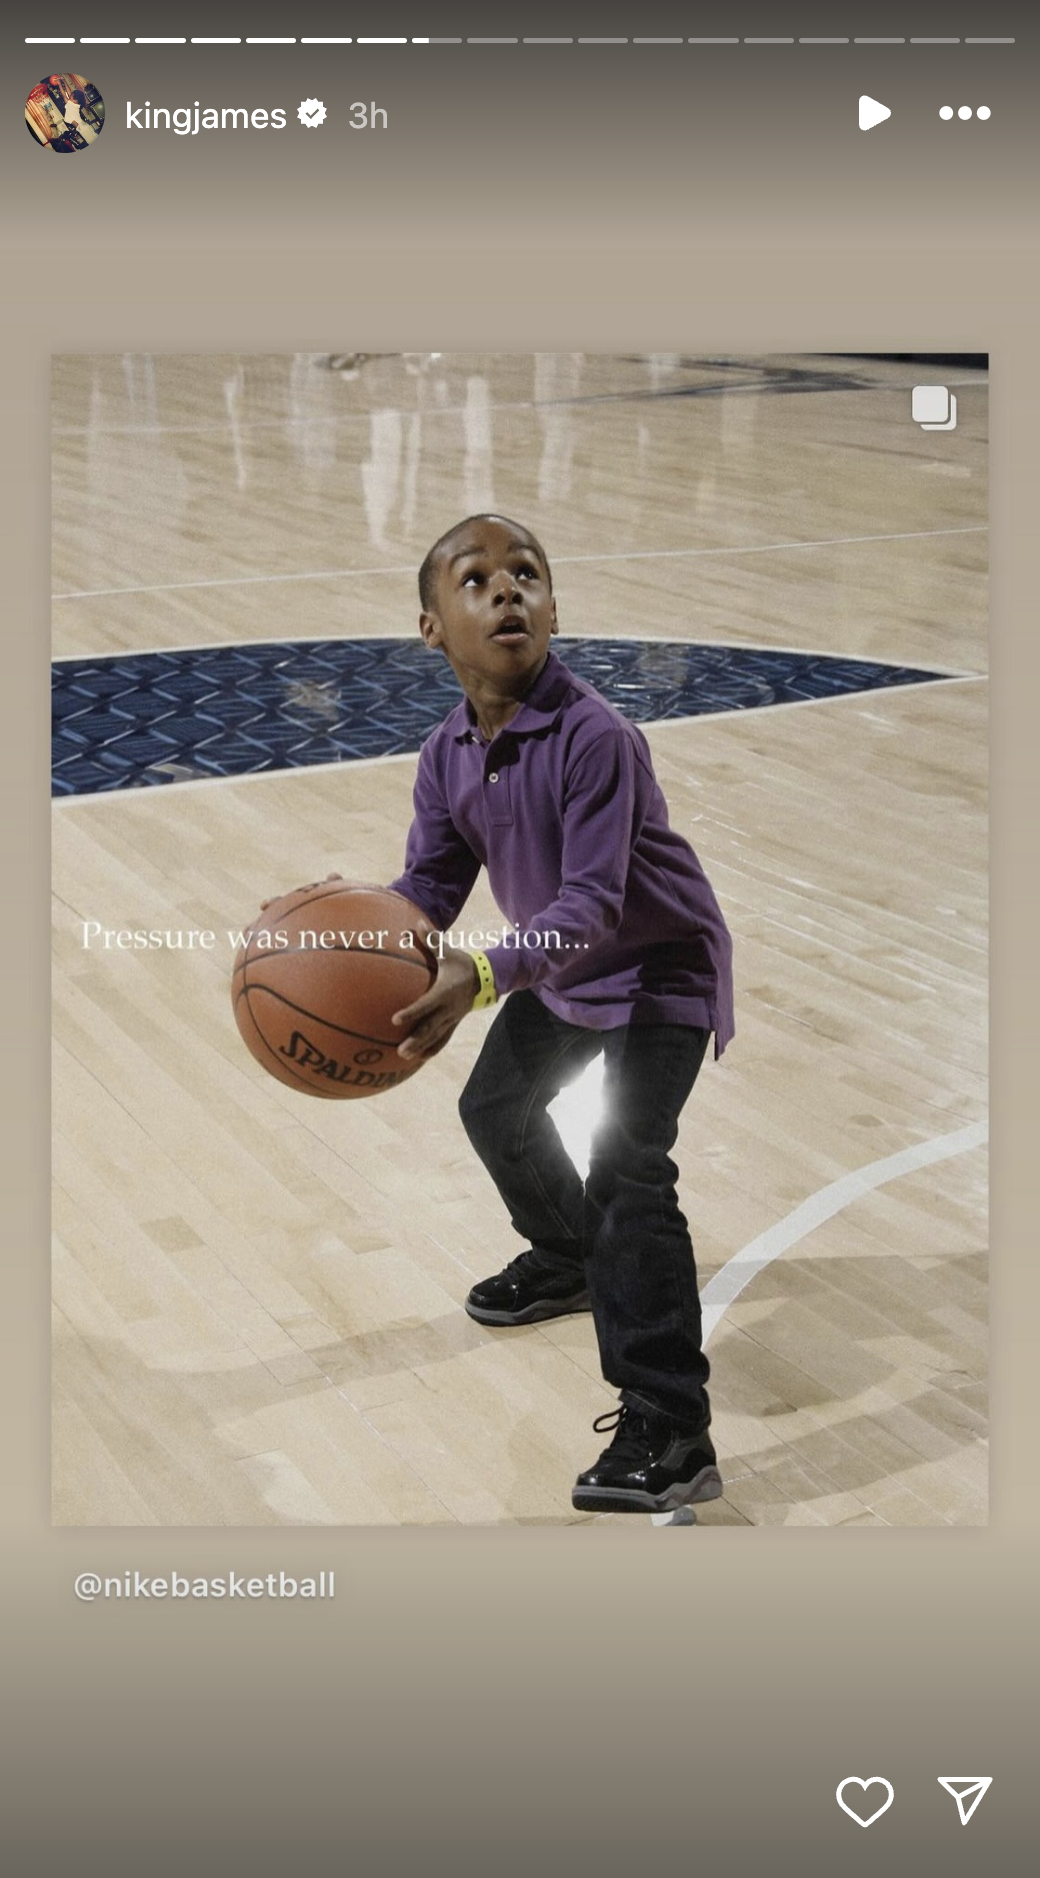 Young boy, likely on a basketball court, holding and preparing to shoot a basketball. Text on image reads, &quot;Pressure was never a question... @nikebasketball.&quot;